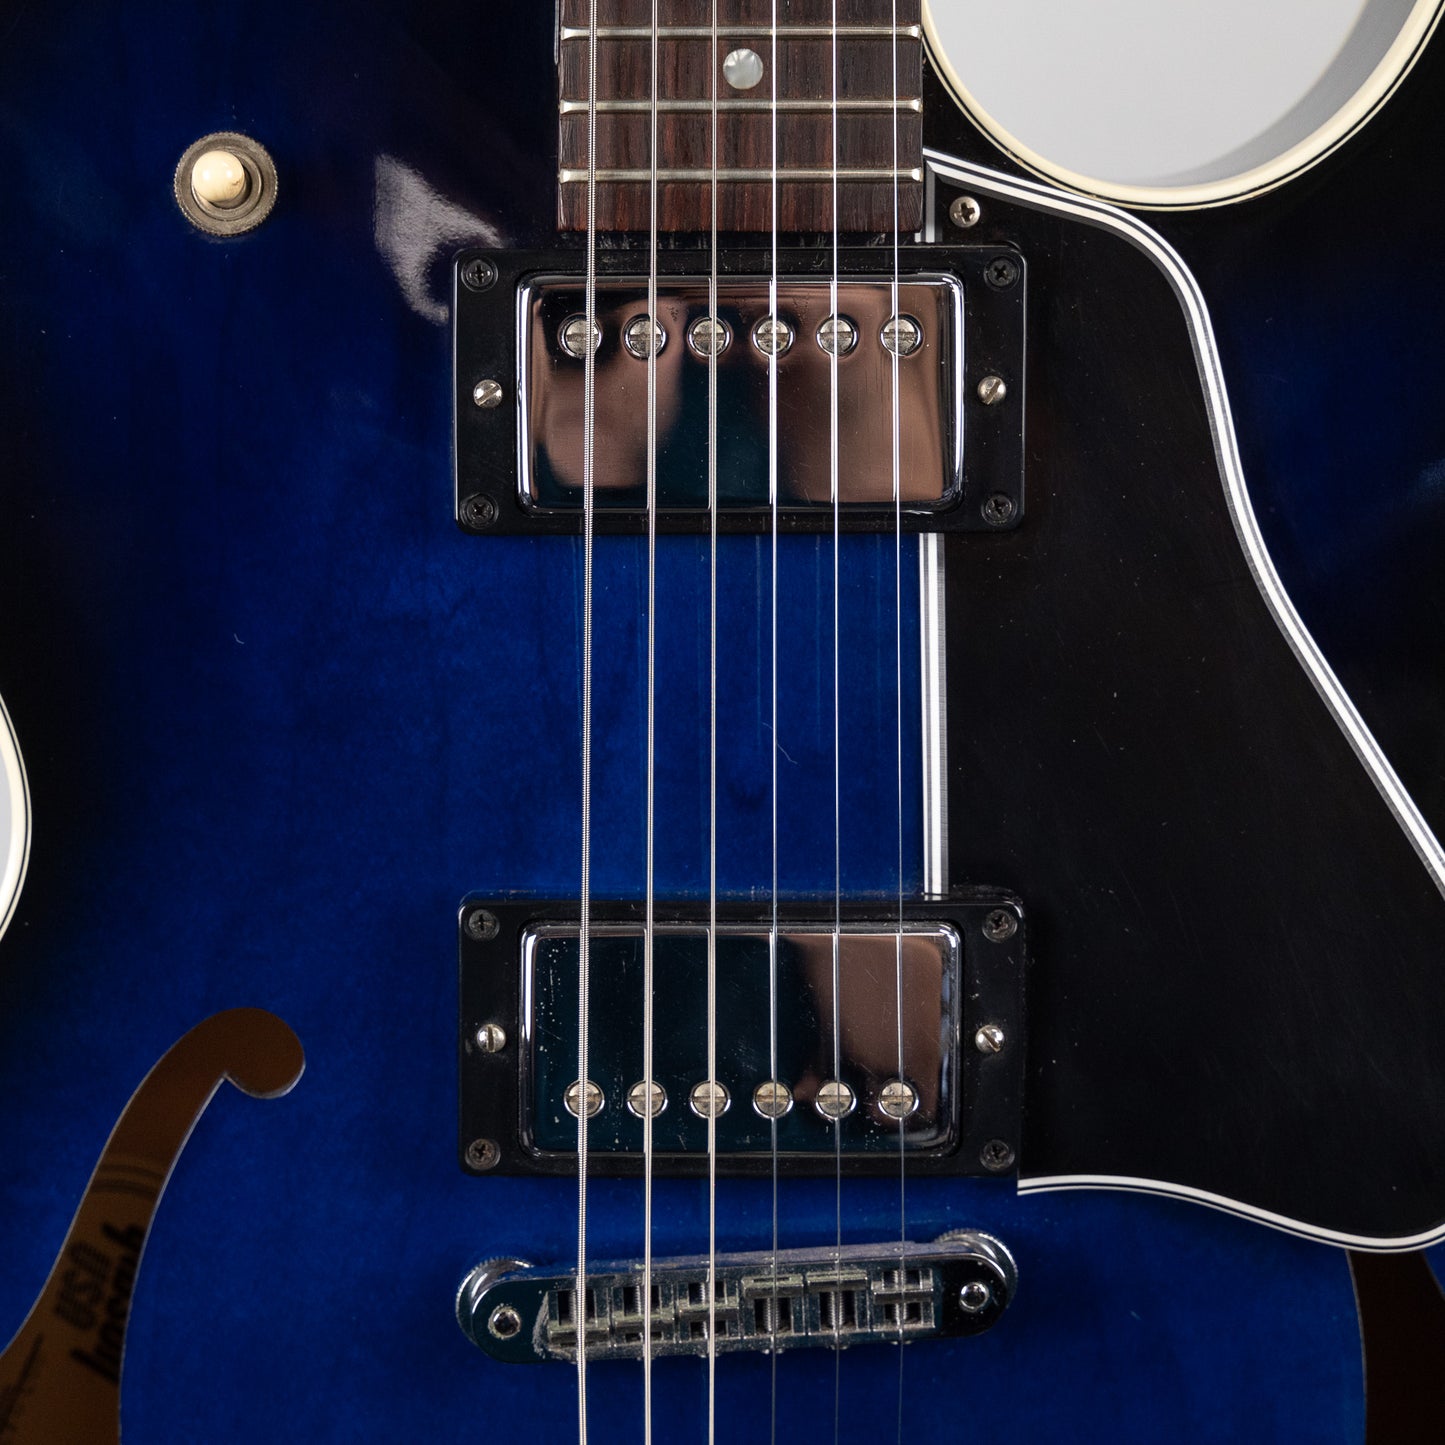 Used 2002 Gibson ES-135 in Blueburst